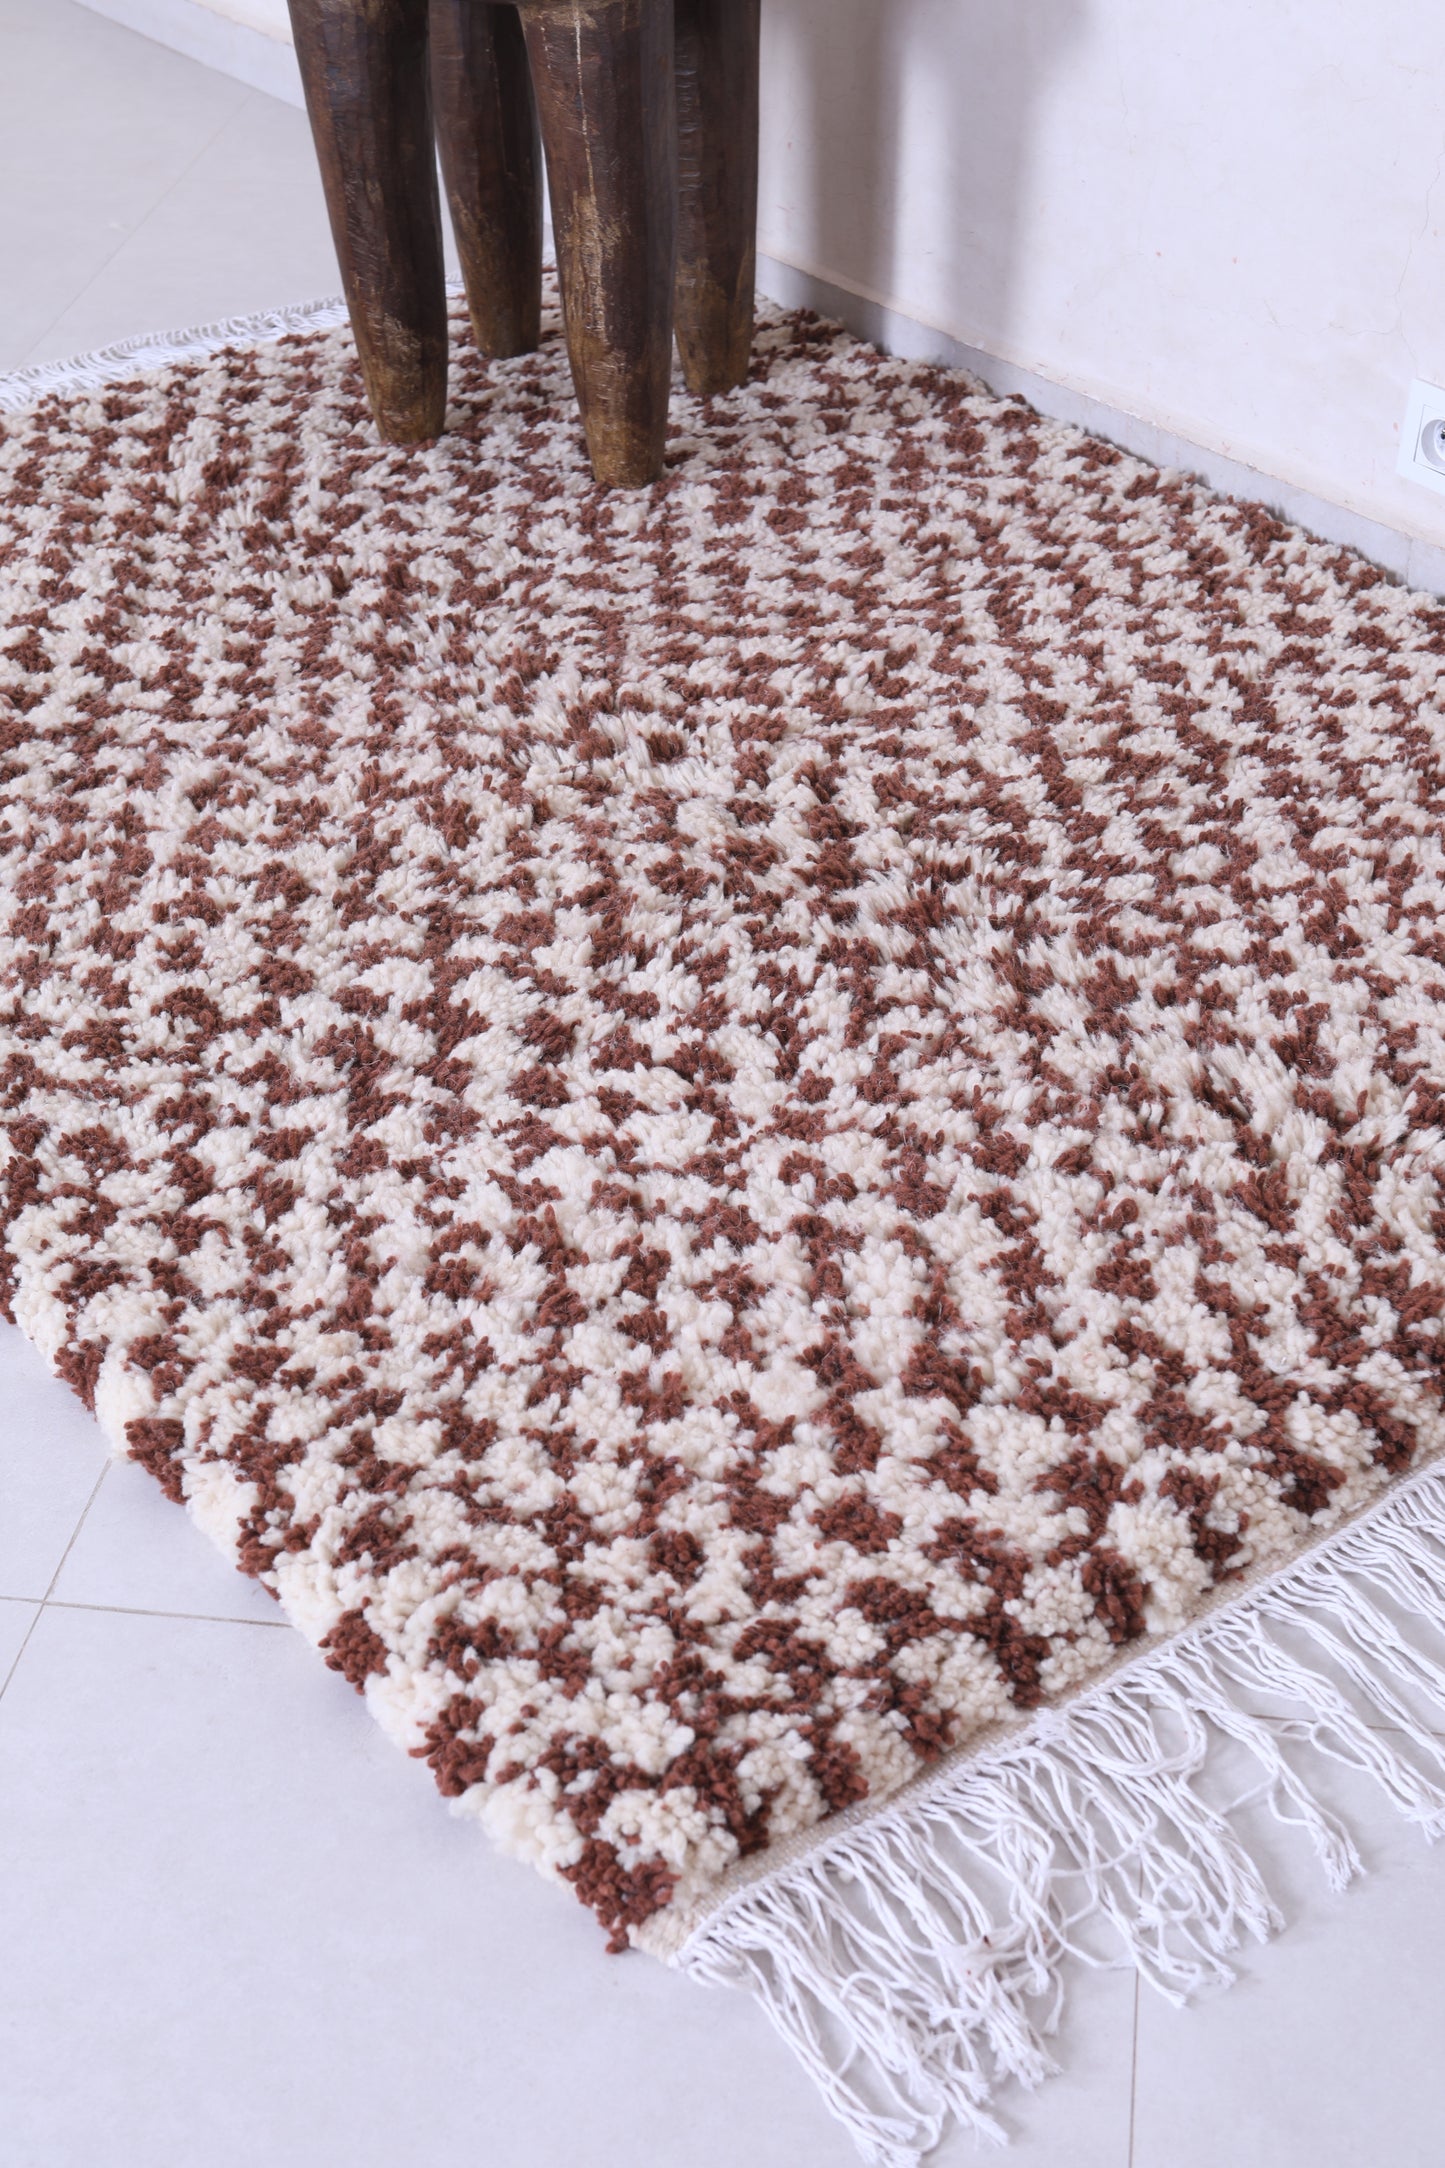 Shaggy brown and beige check rug 4.6 X 6.2 Feet